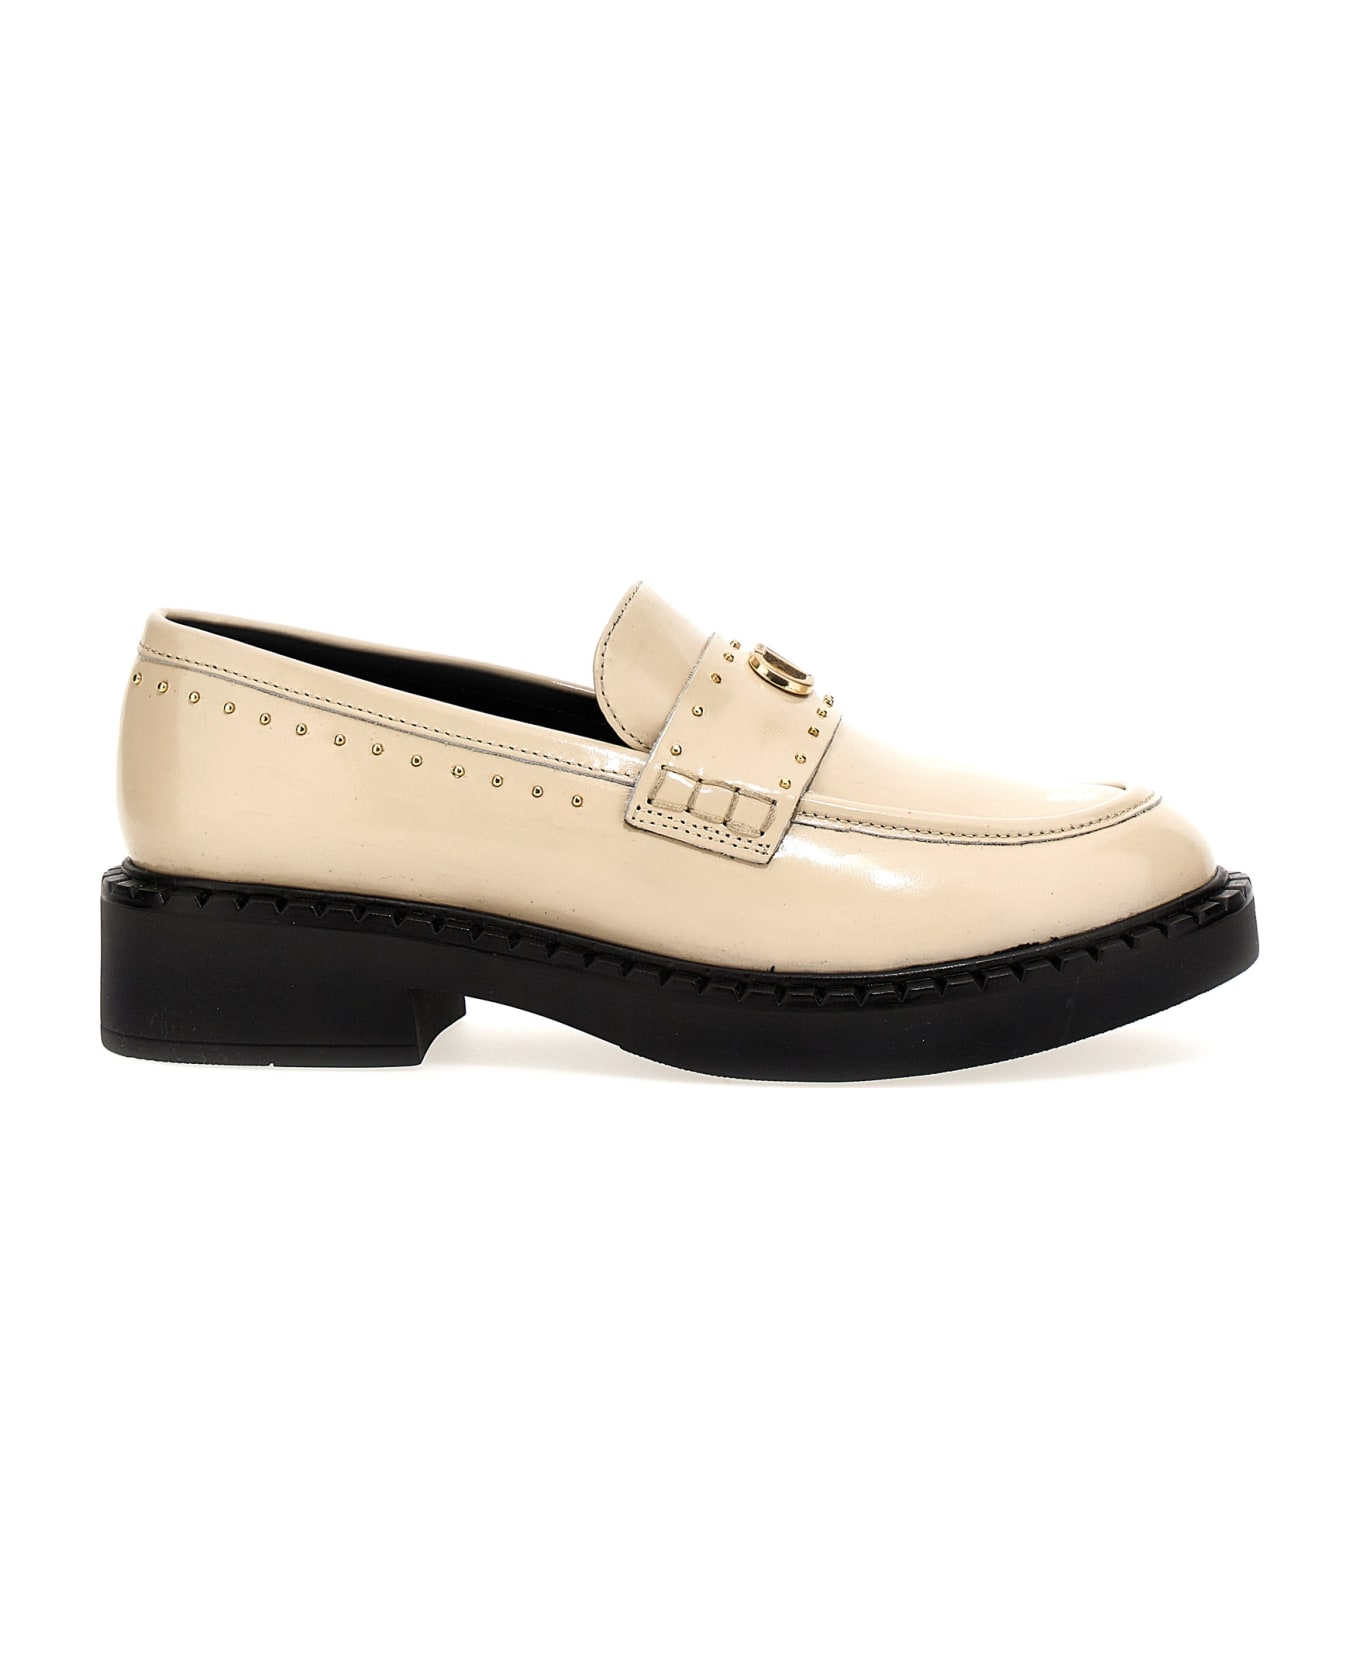 TwinSet Studded Logo Loafers - White/Black